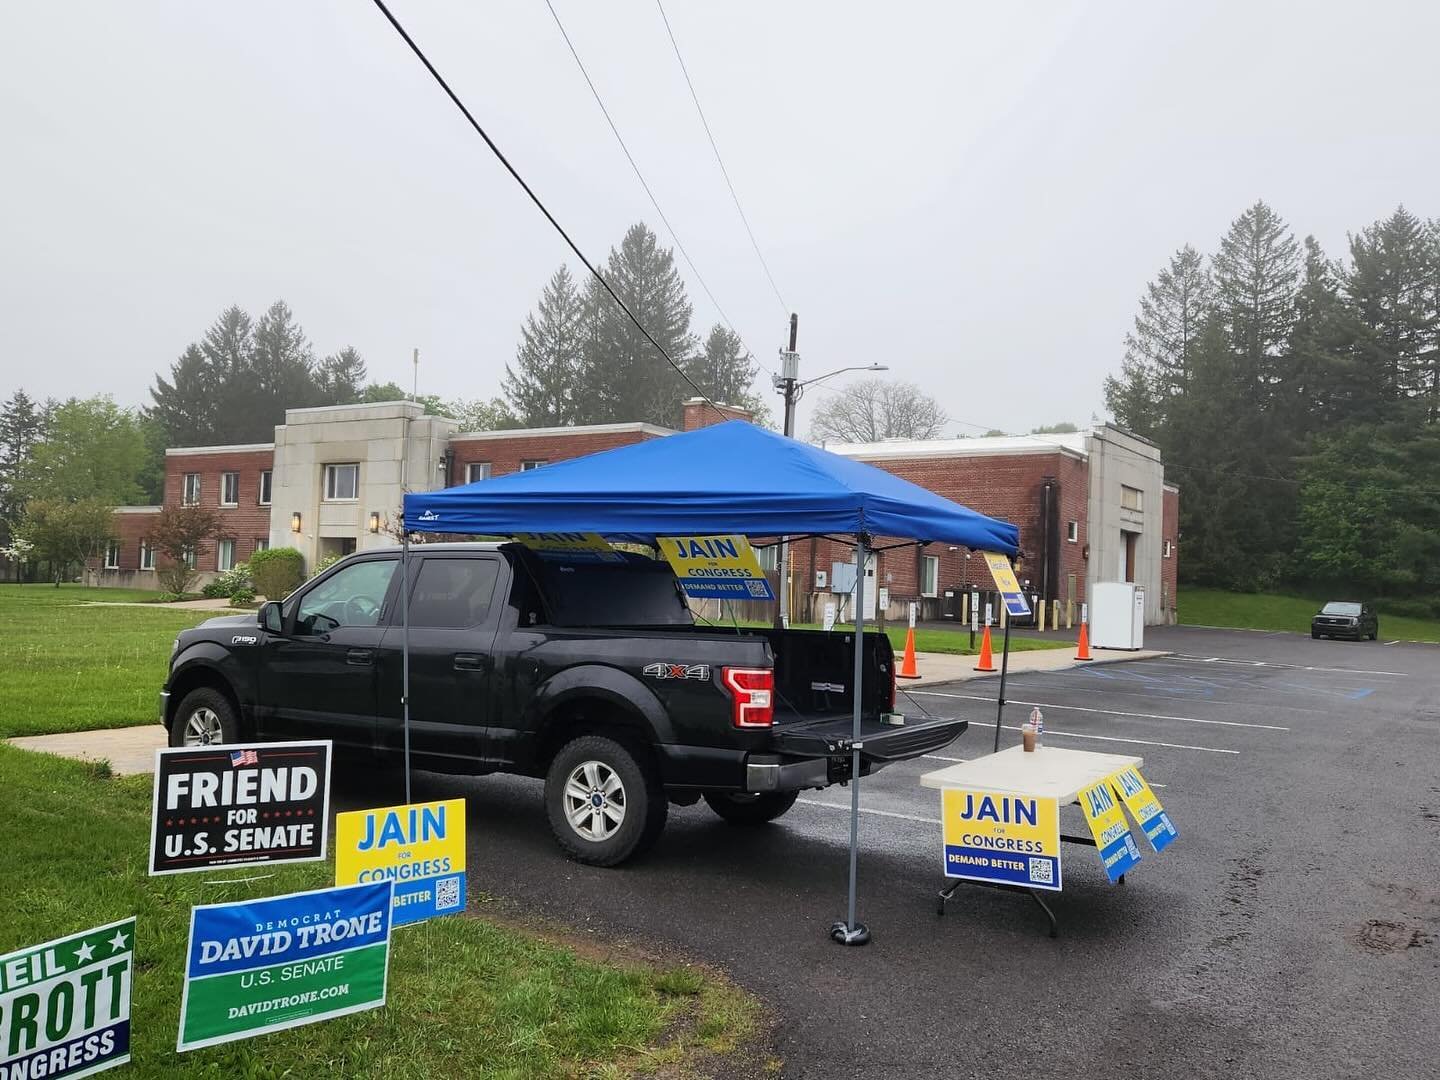 Ready to greet voters in Garrett County today! Hope you have a plan to vote early. JainForCongress.com #DemandBetter